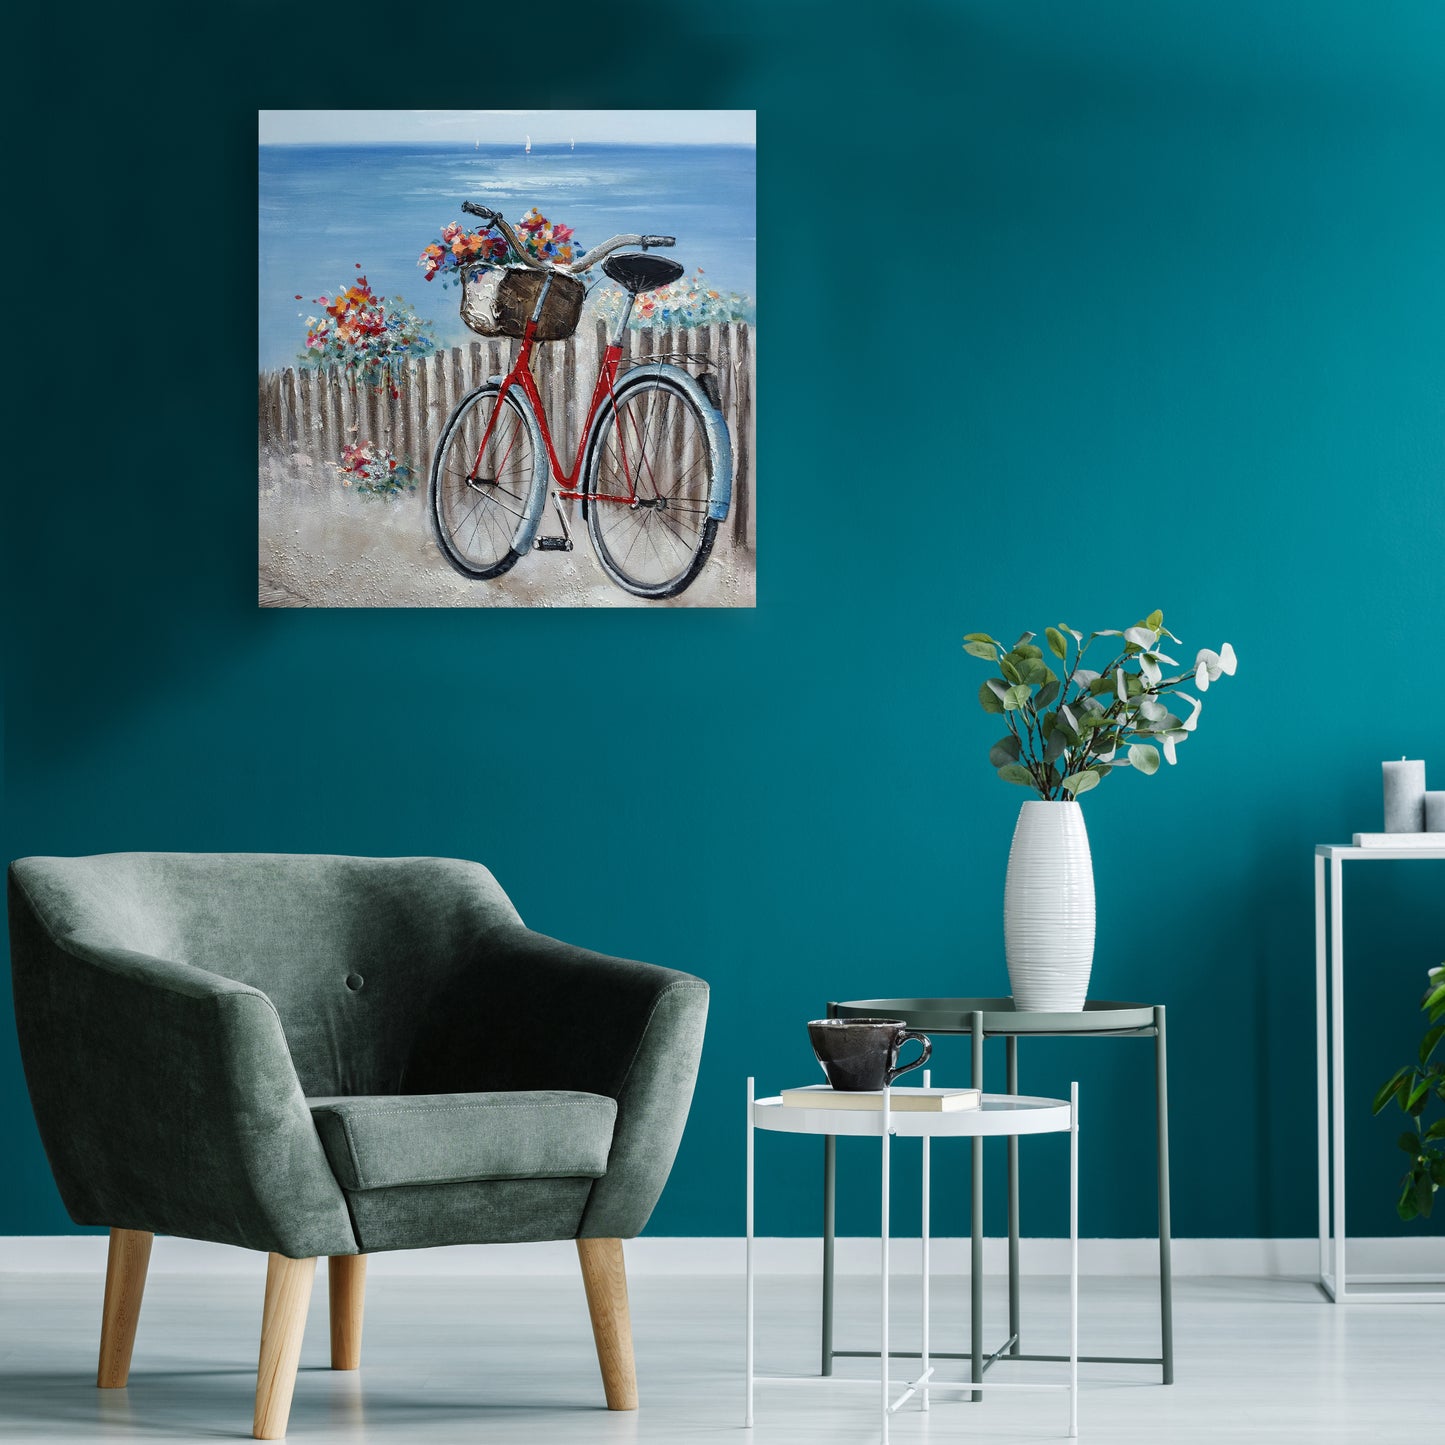 "Flowers & Bicycles on Coastal" Hand painted on Wrapped Canvas